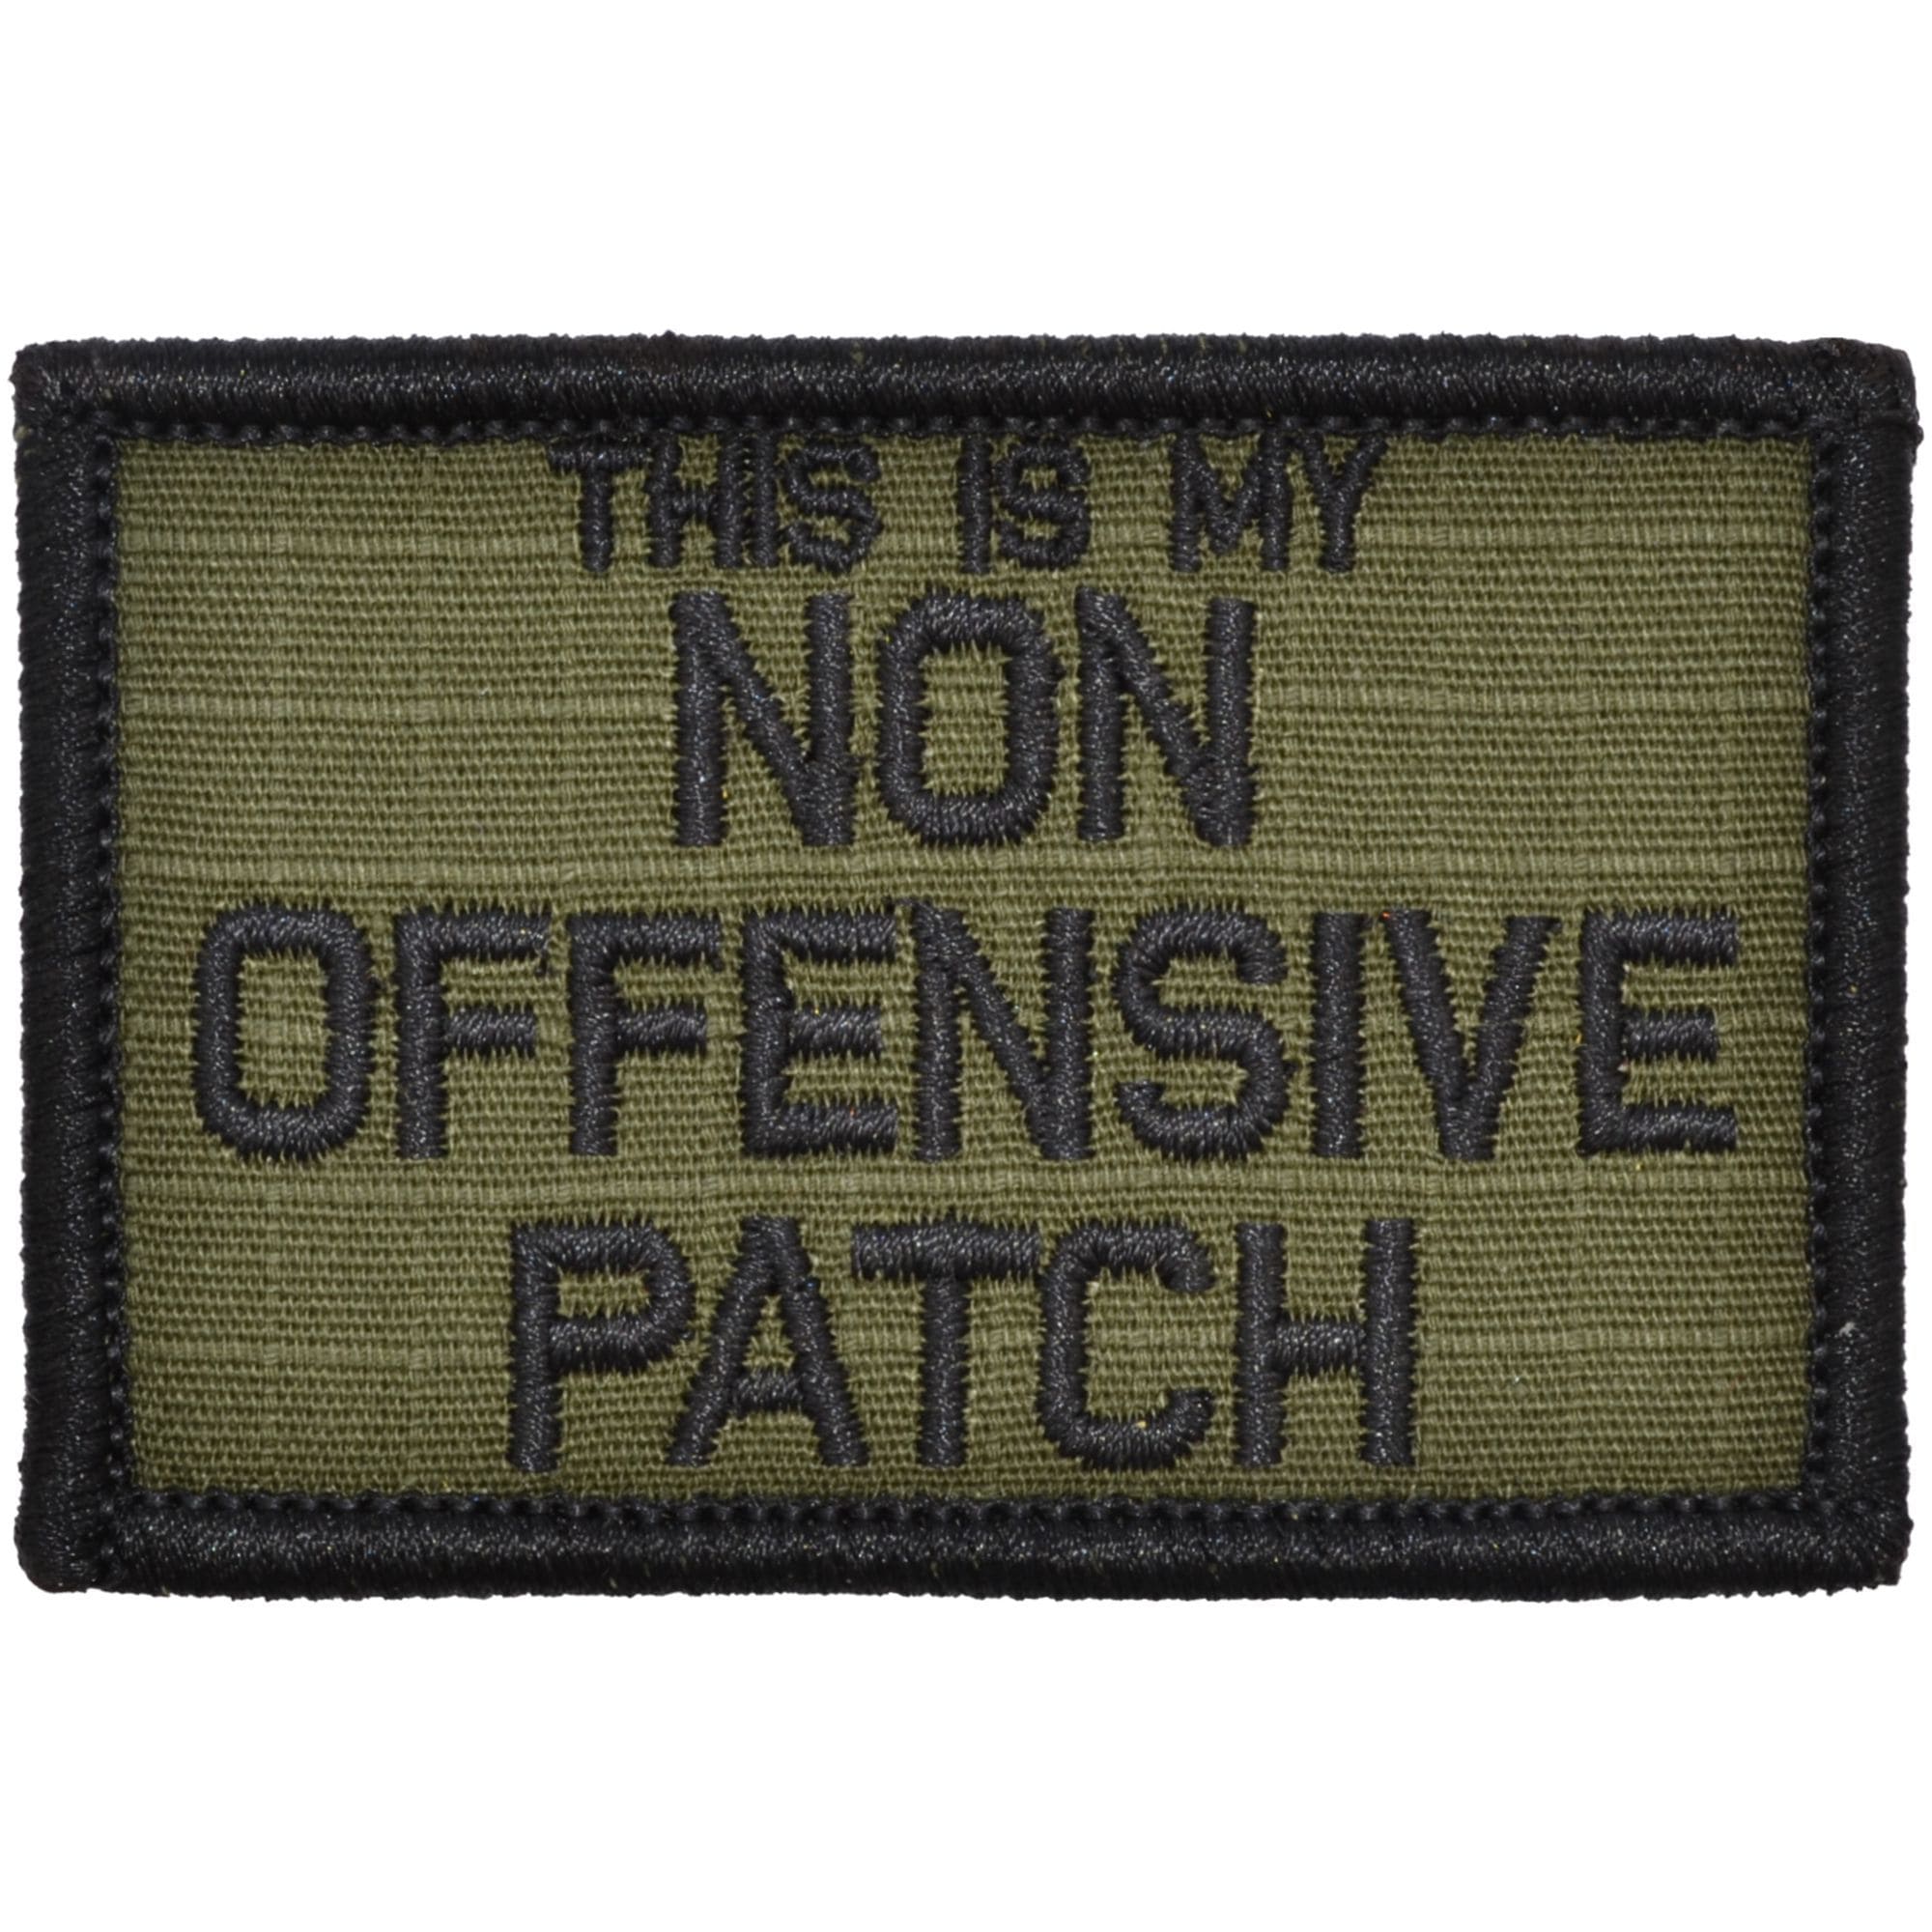 Tactical Gear Junkie Patches Olive Drab This Is My Non Offensive Patch - 2x3 Patch